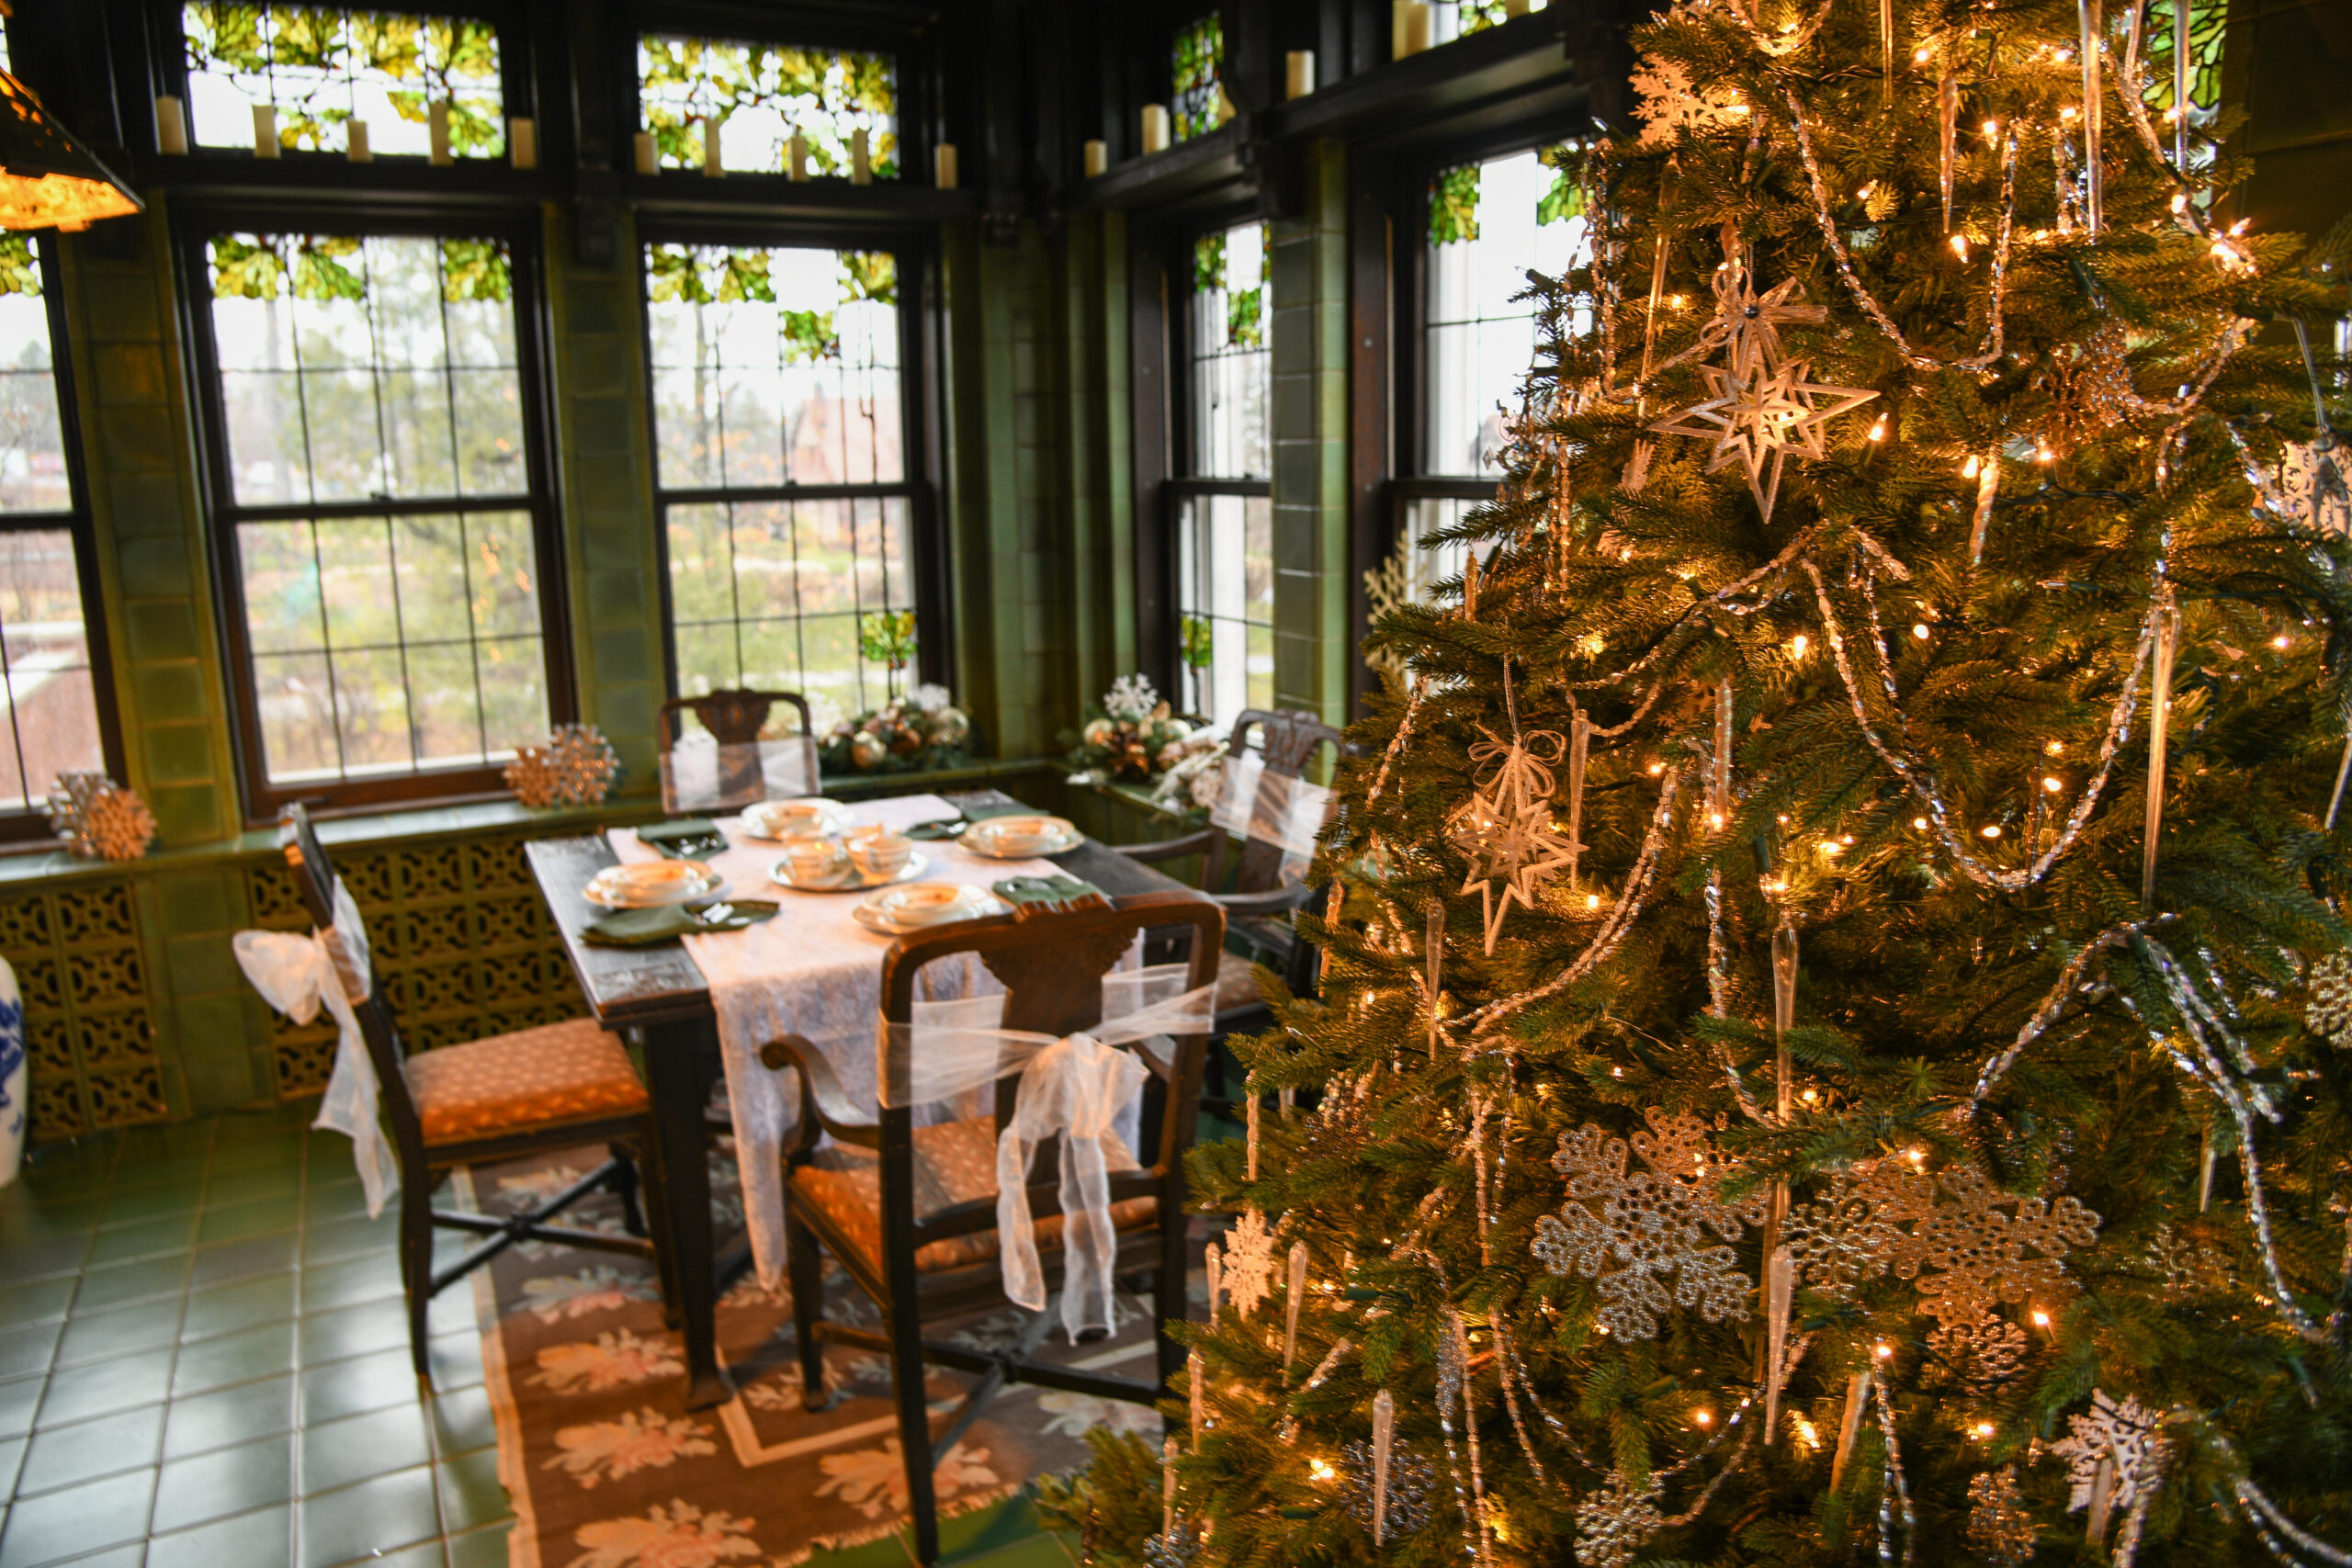 A Christmas tree decroated with lights, ornaments, and white snowflakes stands in front of a plated breakfast table and glass windows.